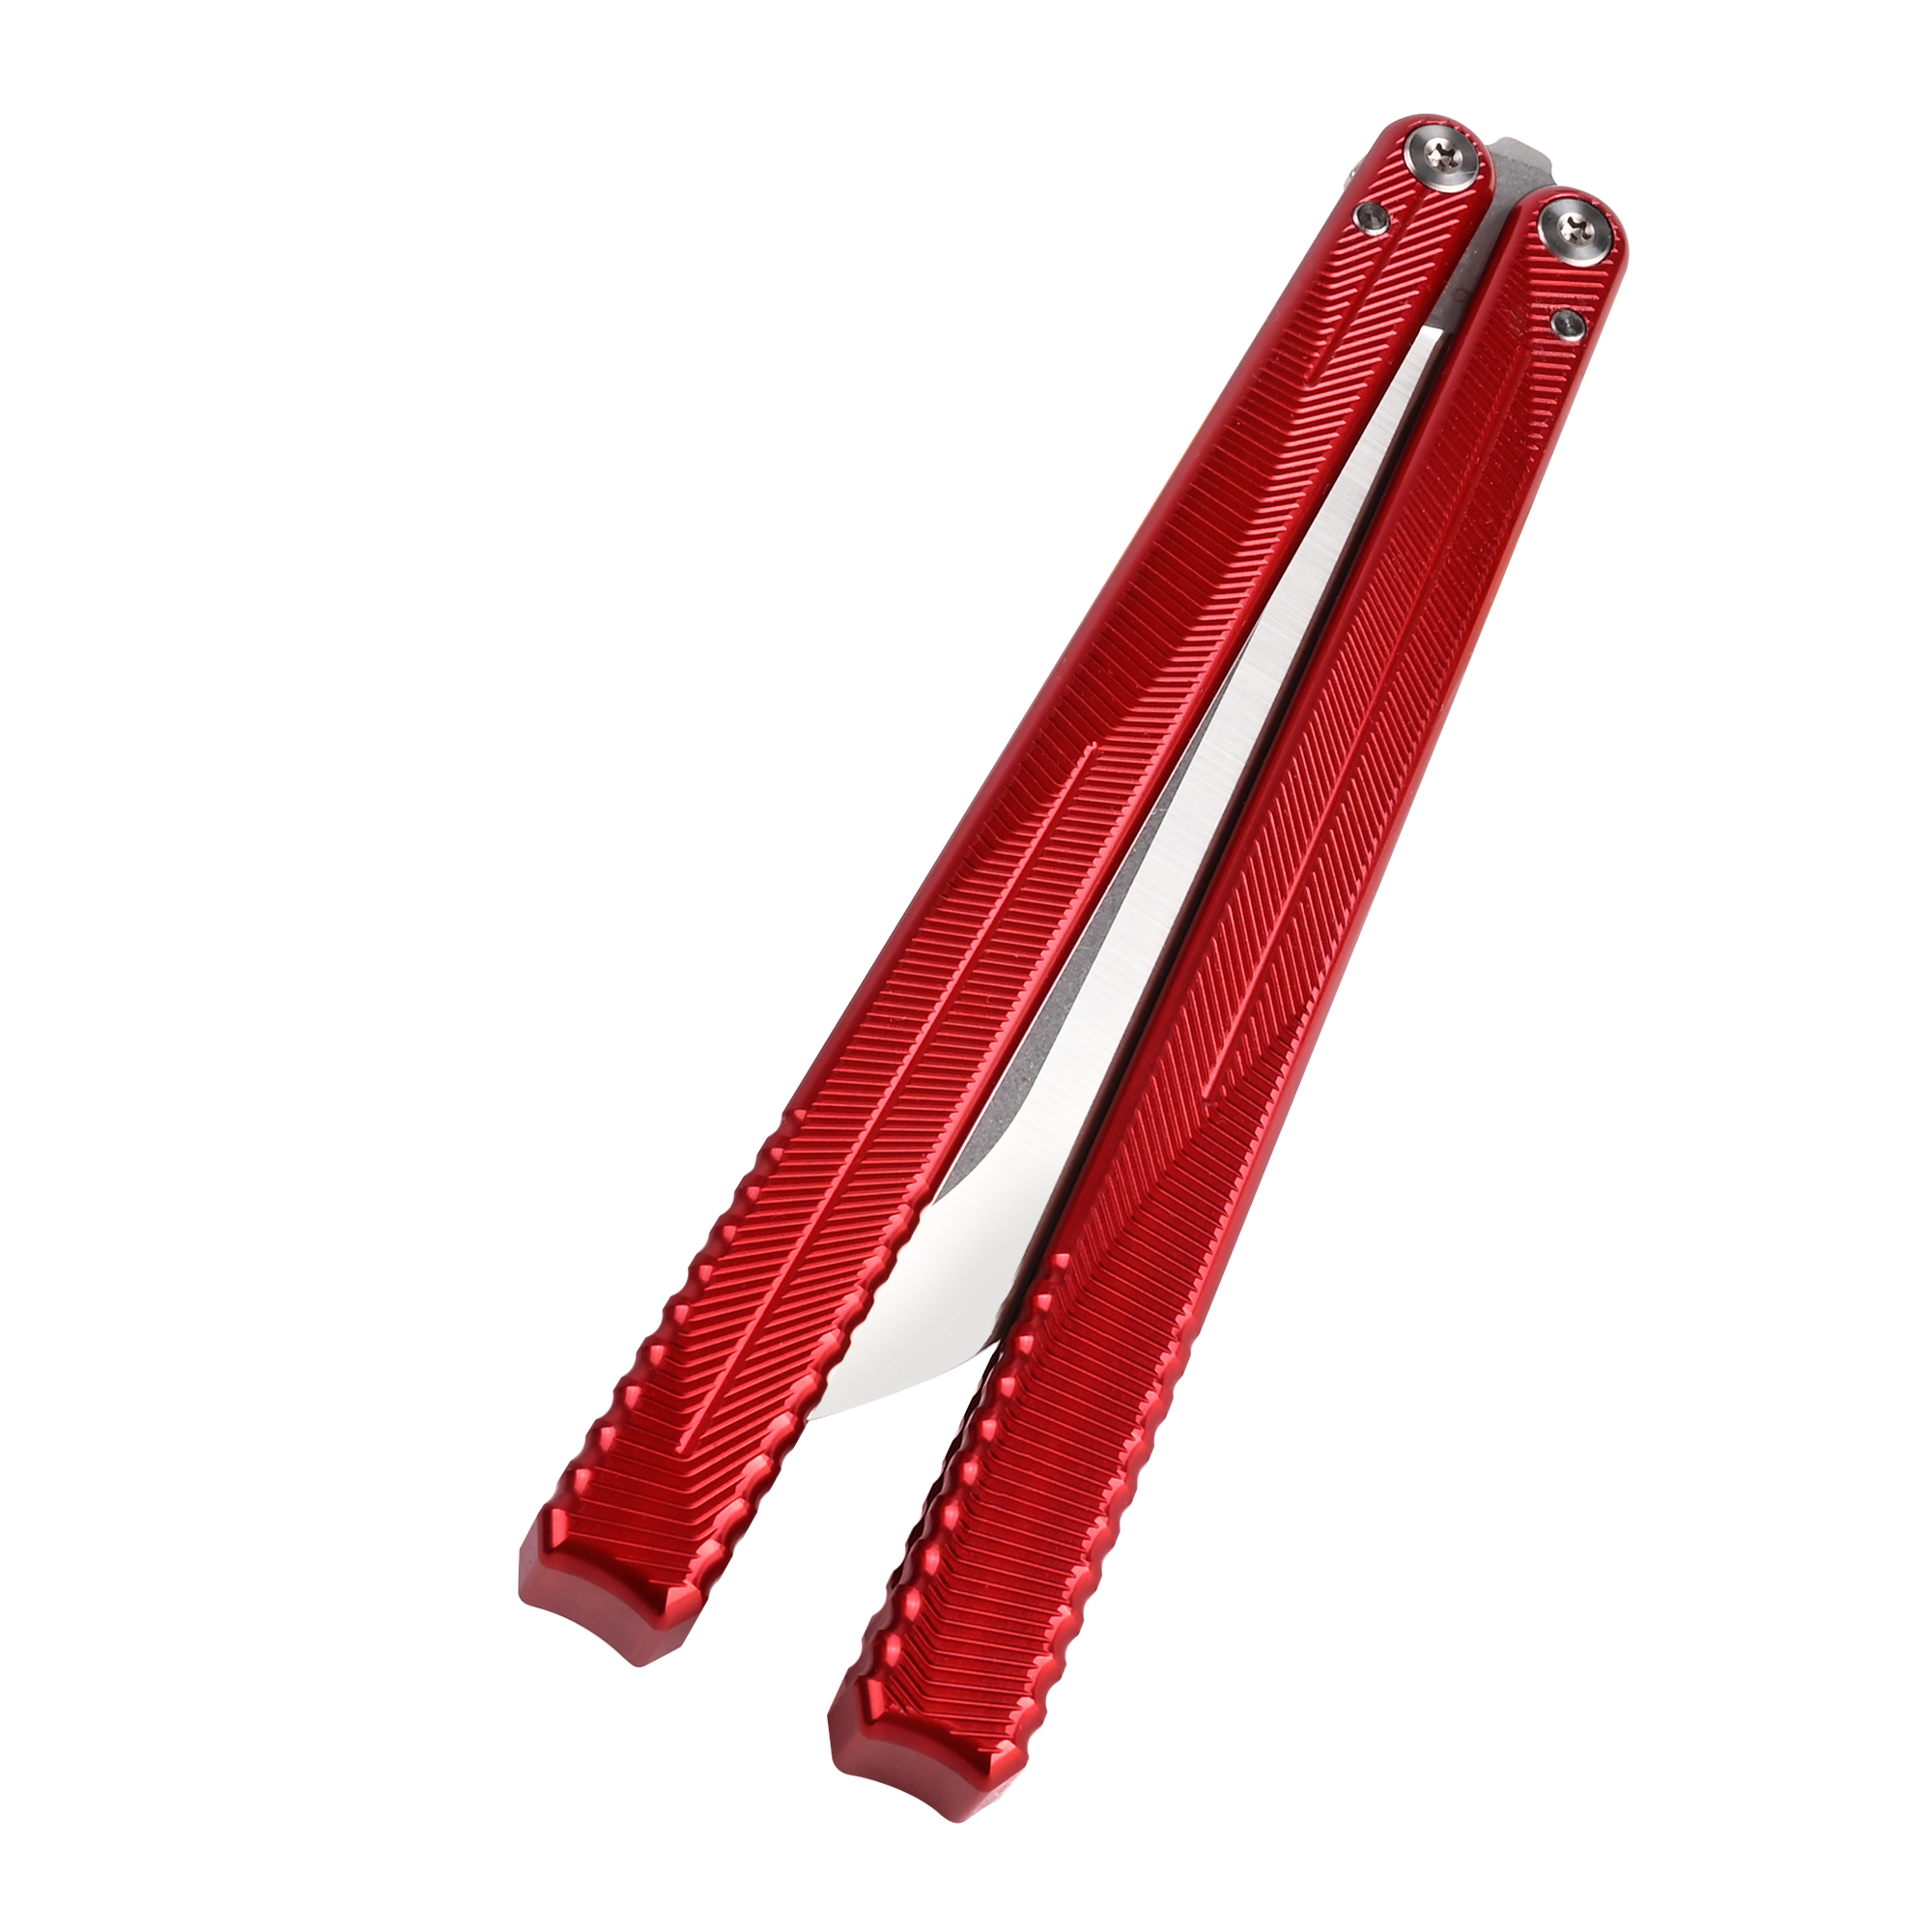 Nabalils Hydra Butterfly Knife Balisong Trainer Dull Blade-RED-Closed